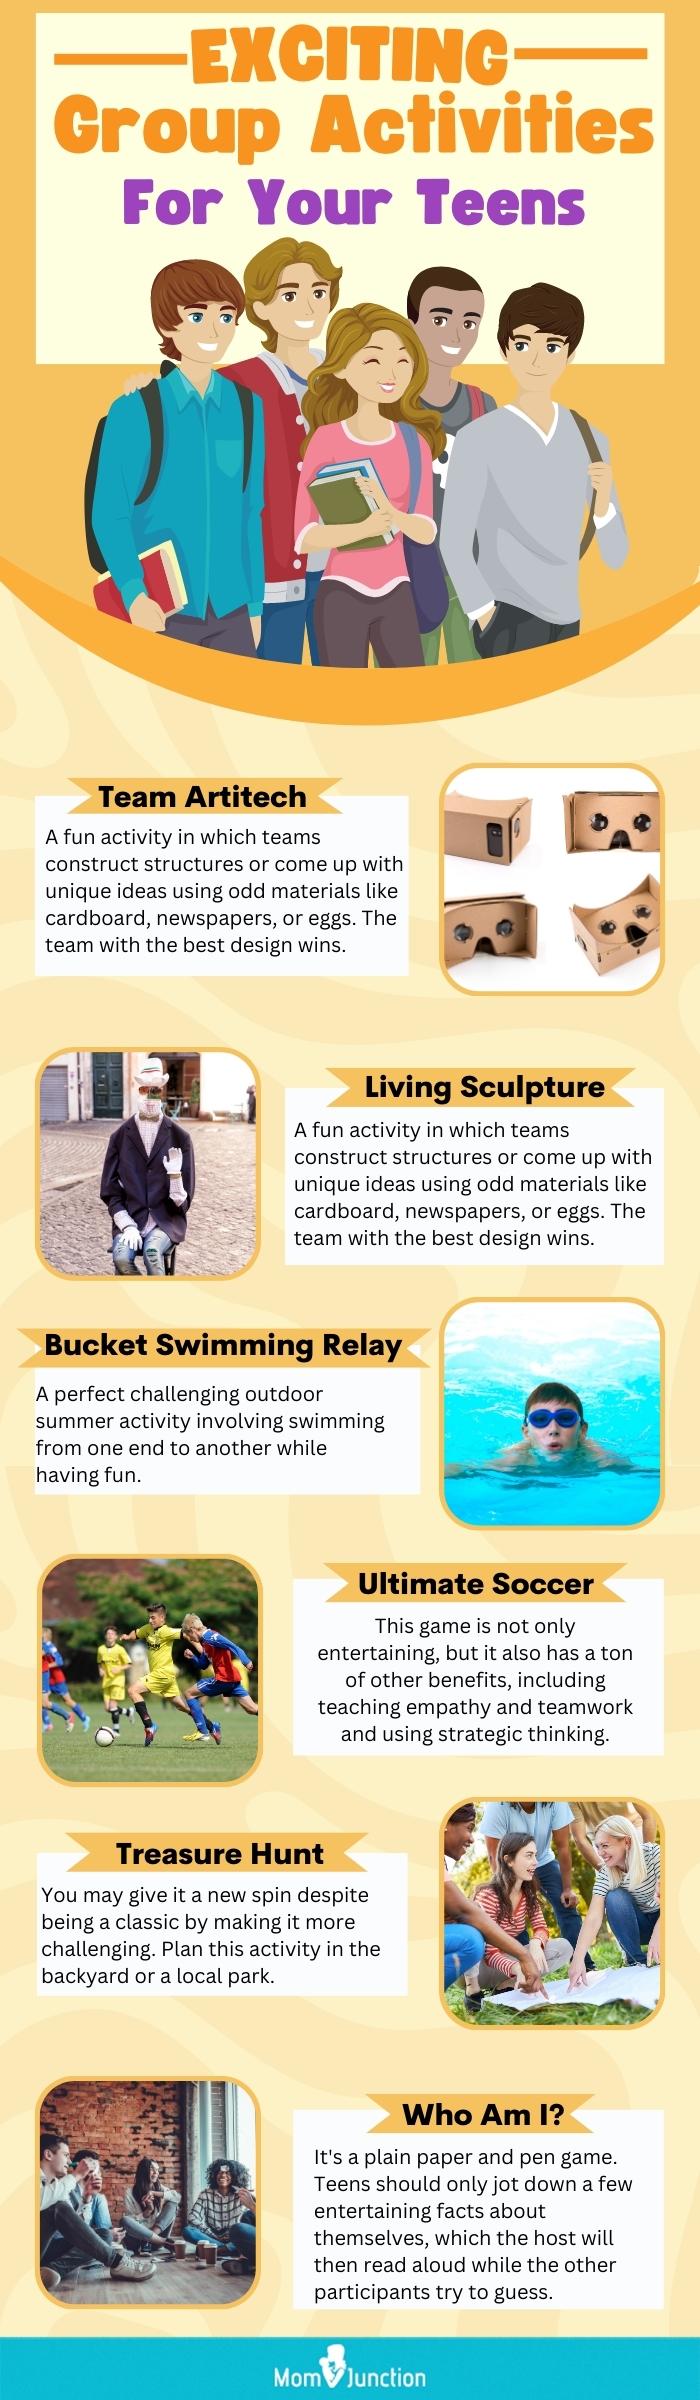 exciting group activities for your teens (infographic)